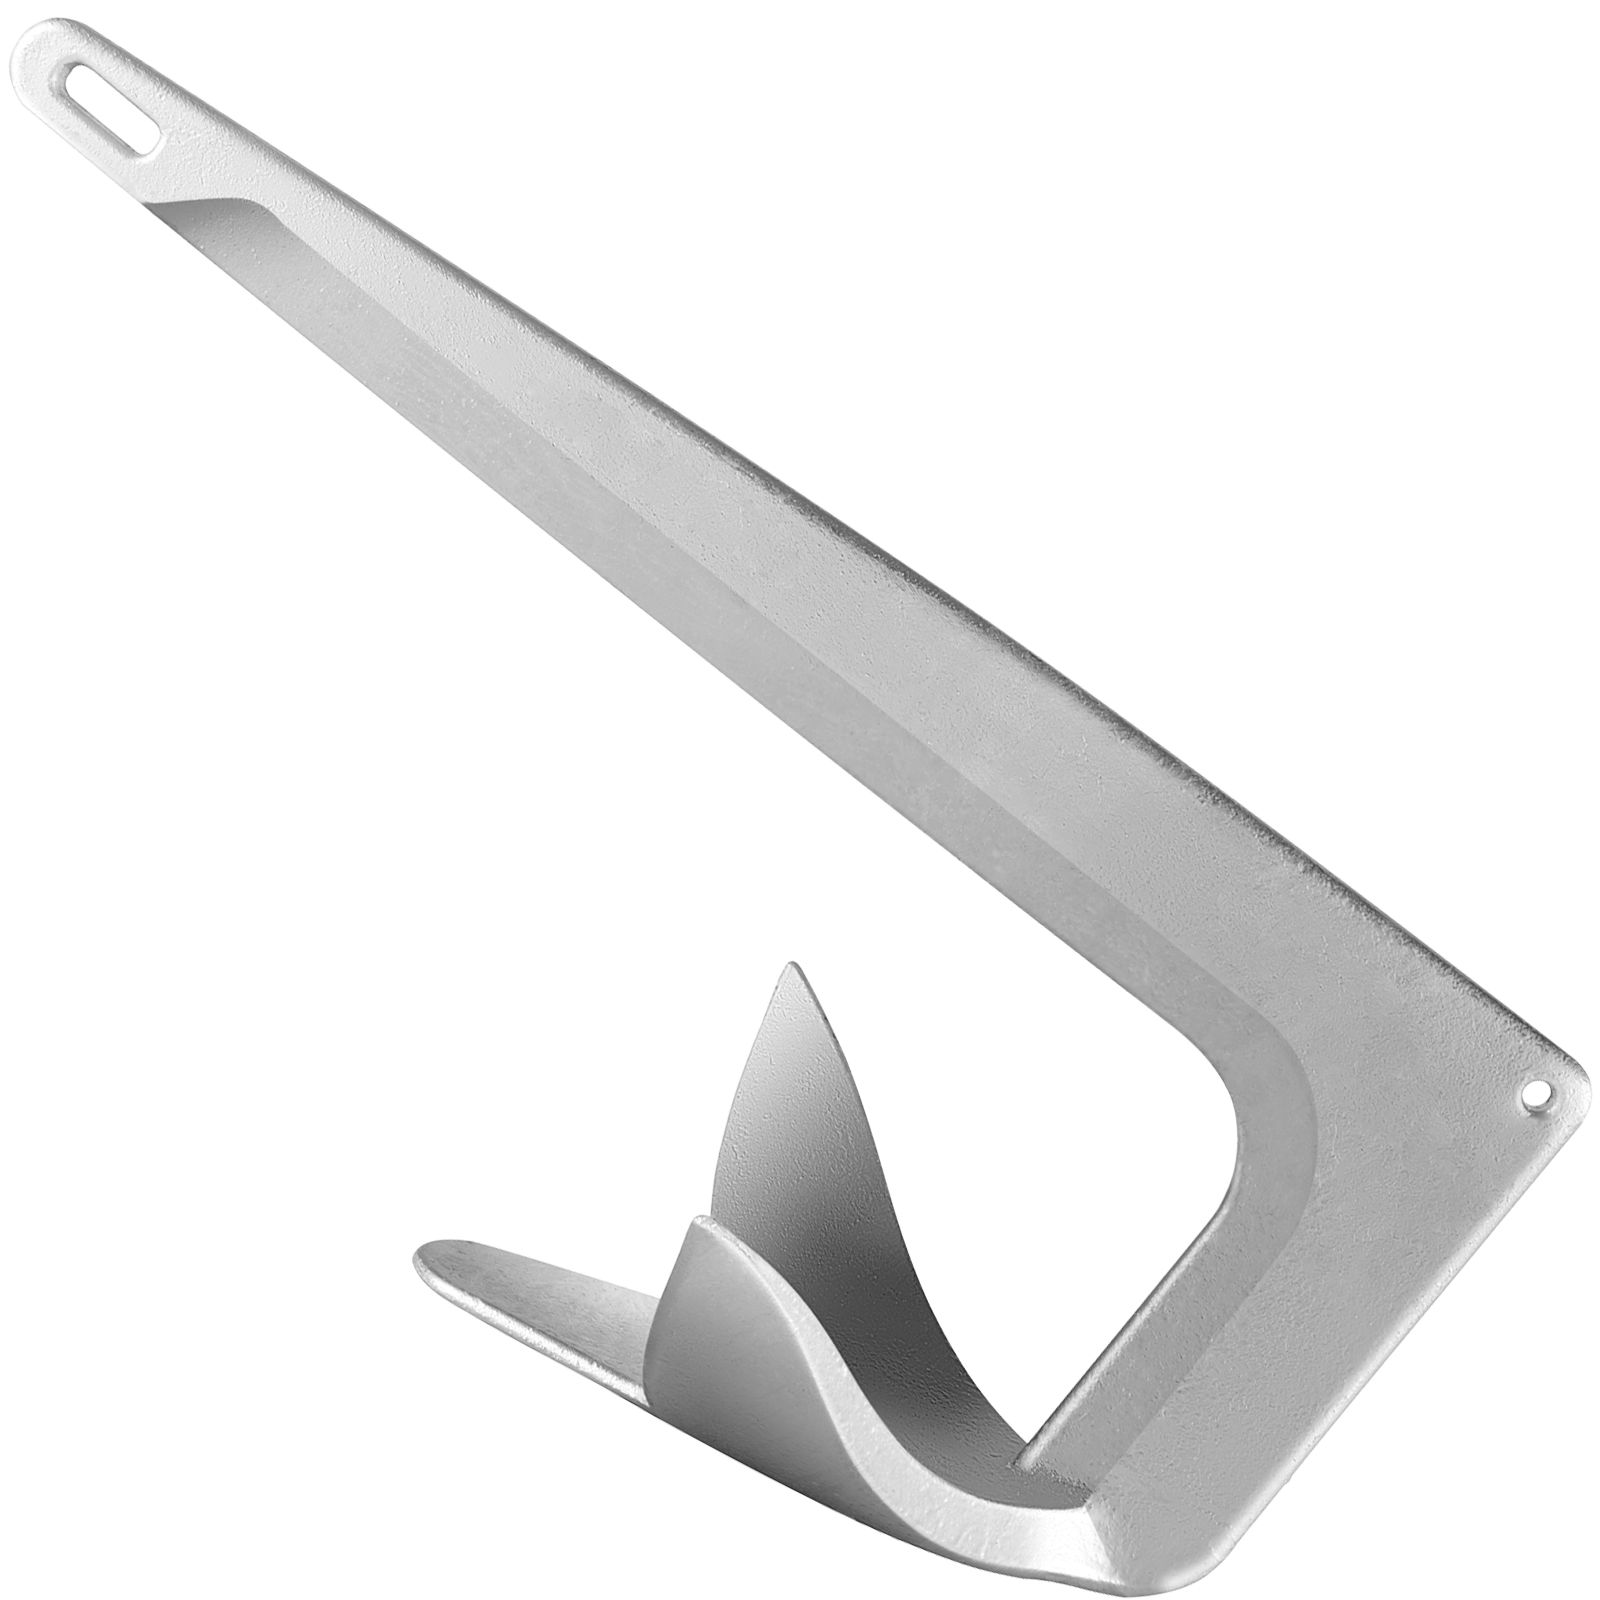 VEVOR Bruce Claw Anchor 22 lb Boat Anchor, Galvanized Steel Boat